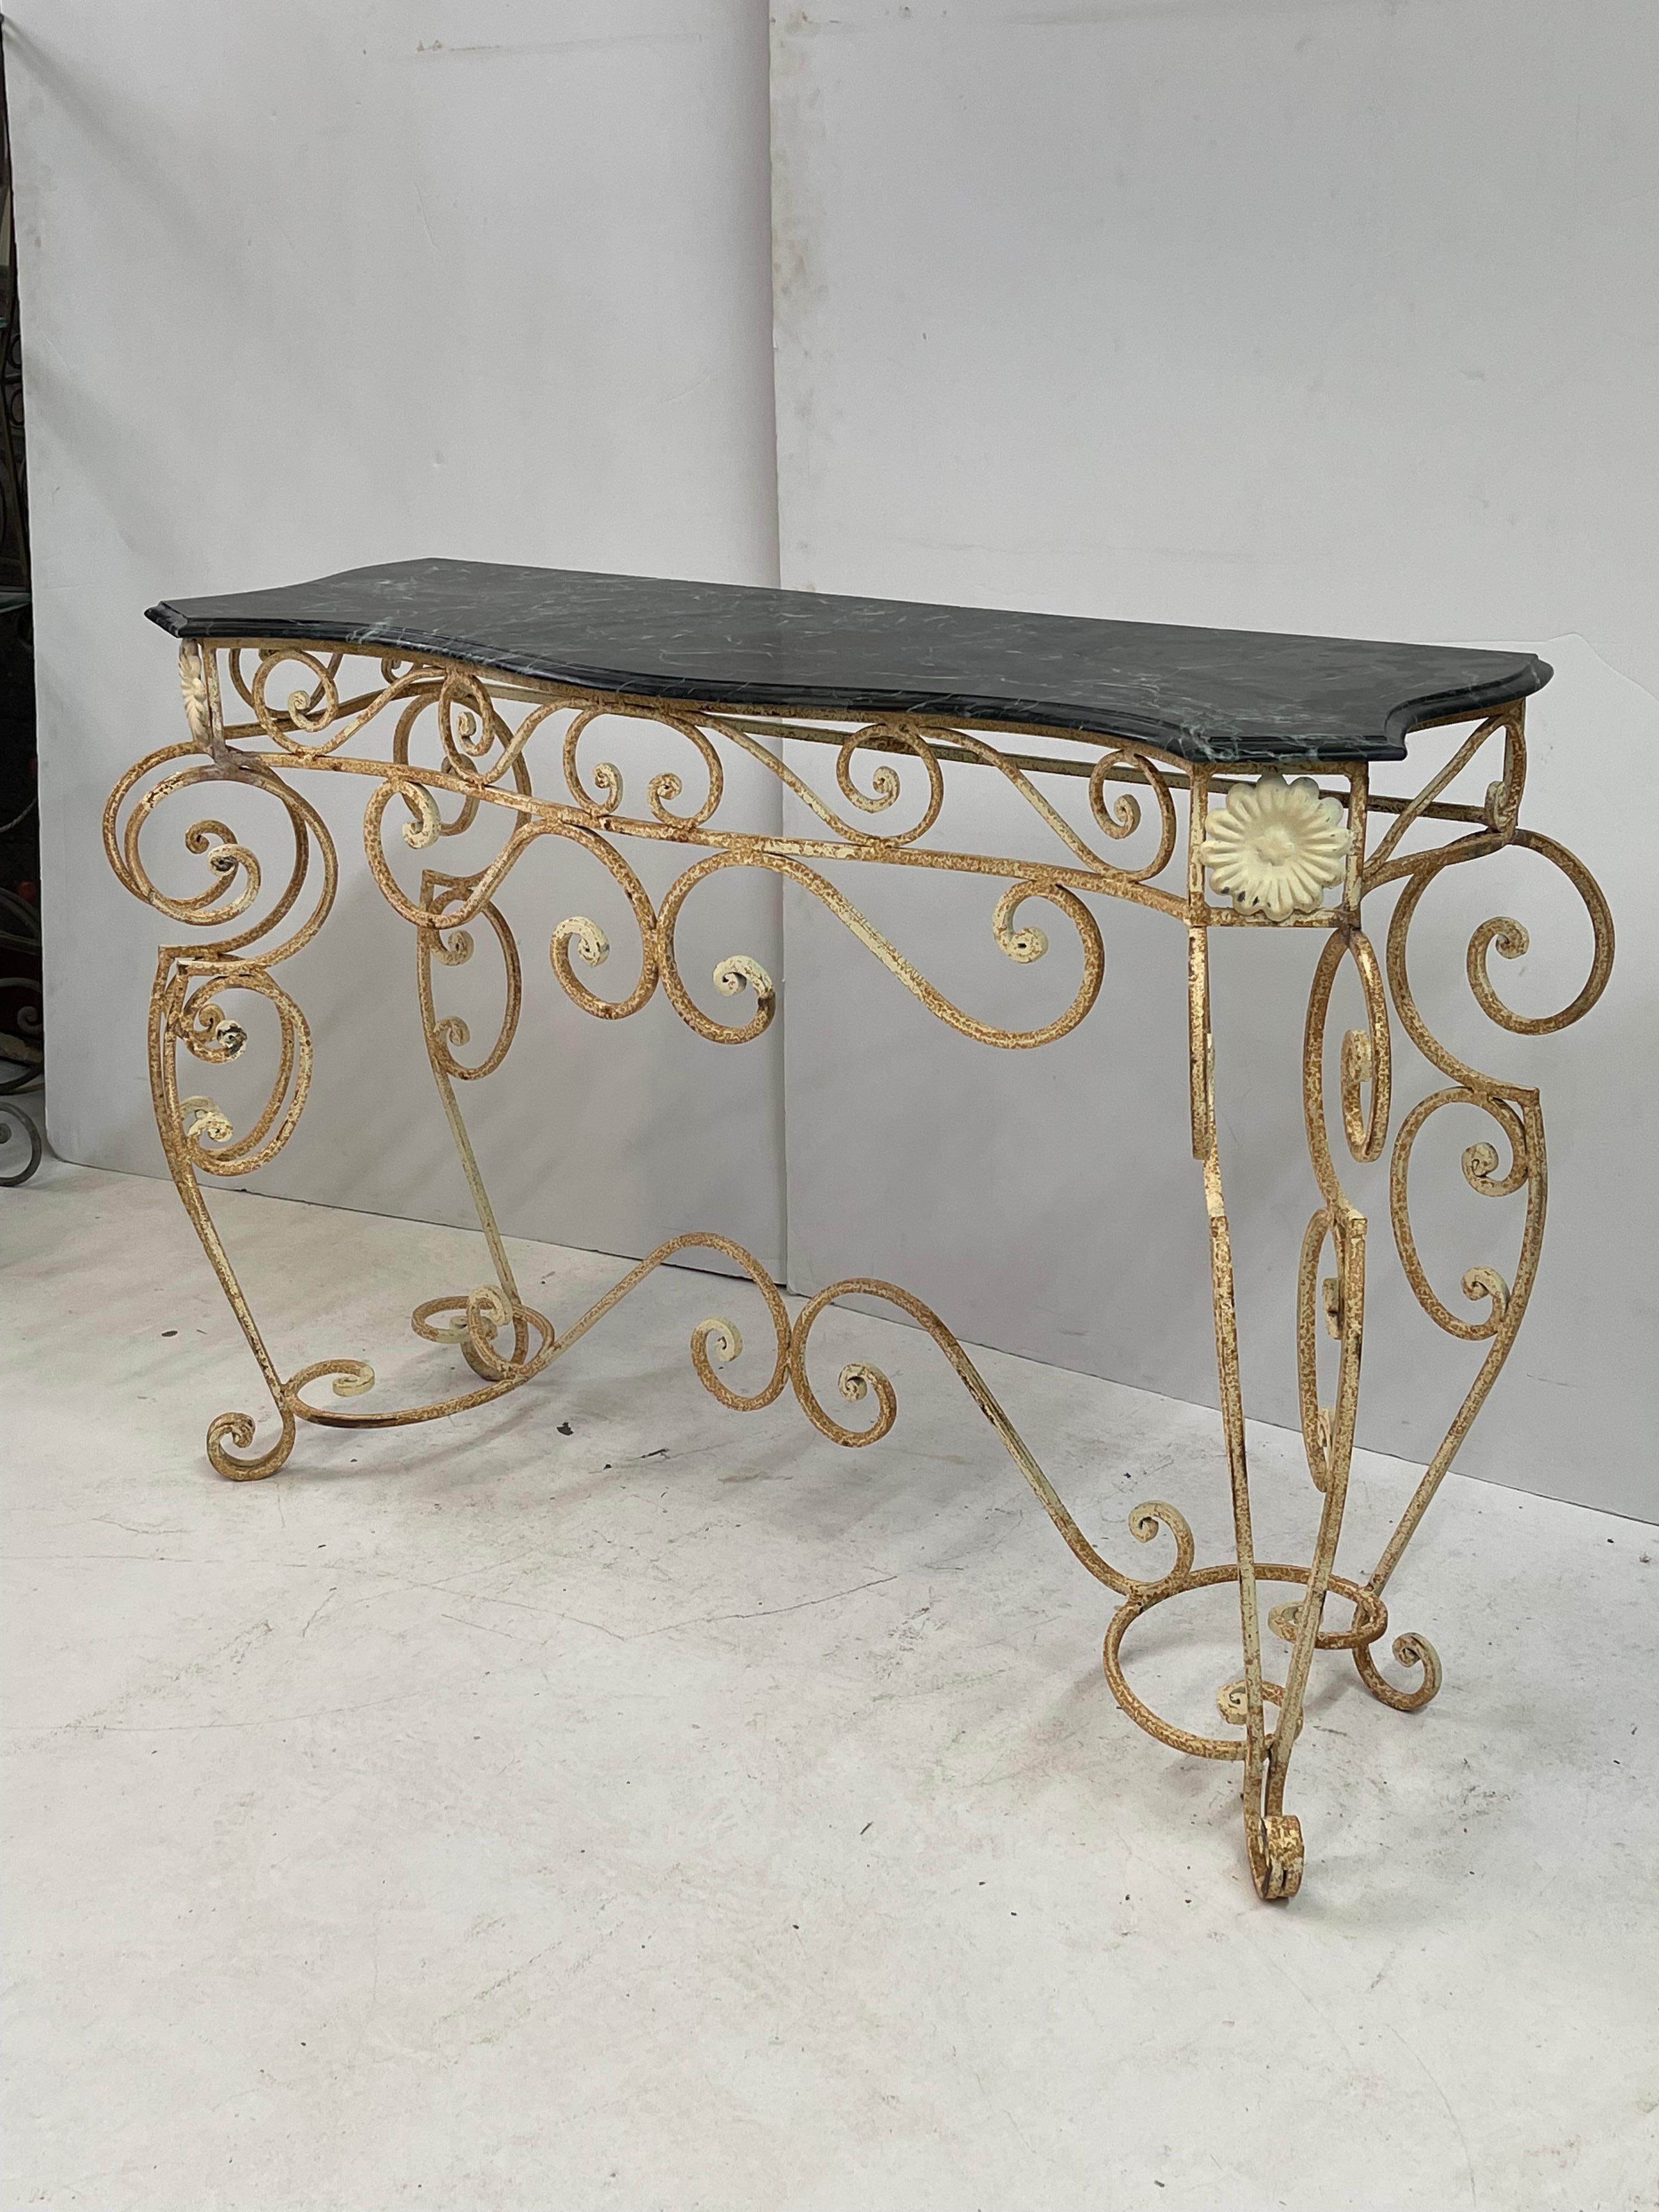 20th Century French serpentine shaped console table of scrolling iron. The table has a shaped and beveled top of dark green marble. The finish of the table base is cream paint on iron that has beautifully aged and oxidized over time. 

The table